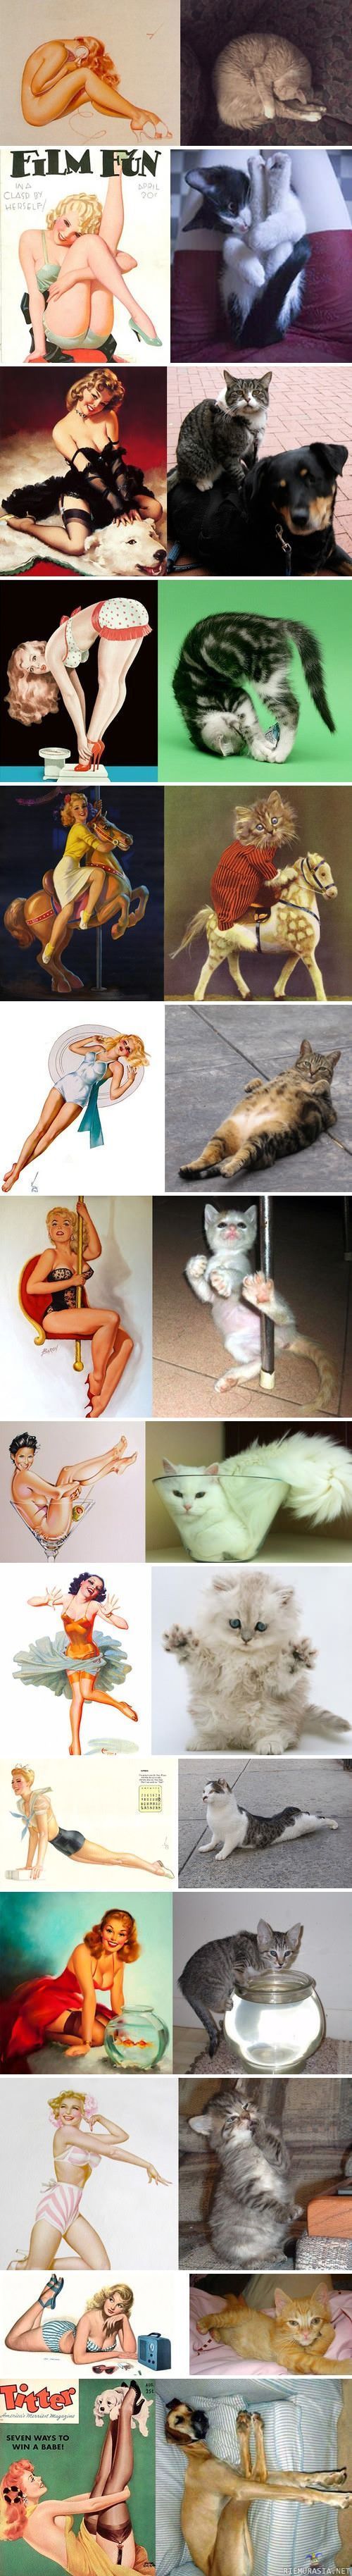 Pin-Up girls and cats (also couple of dogs)